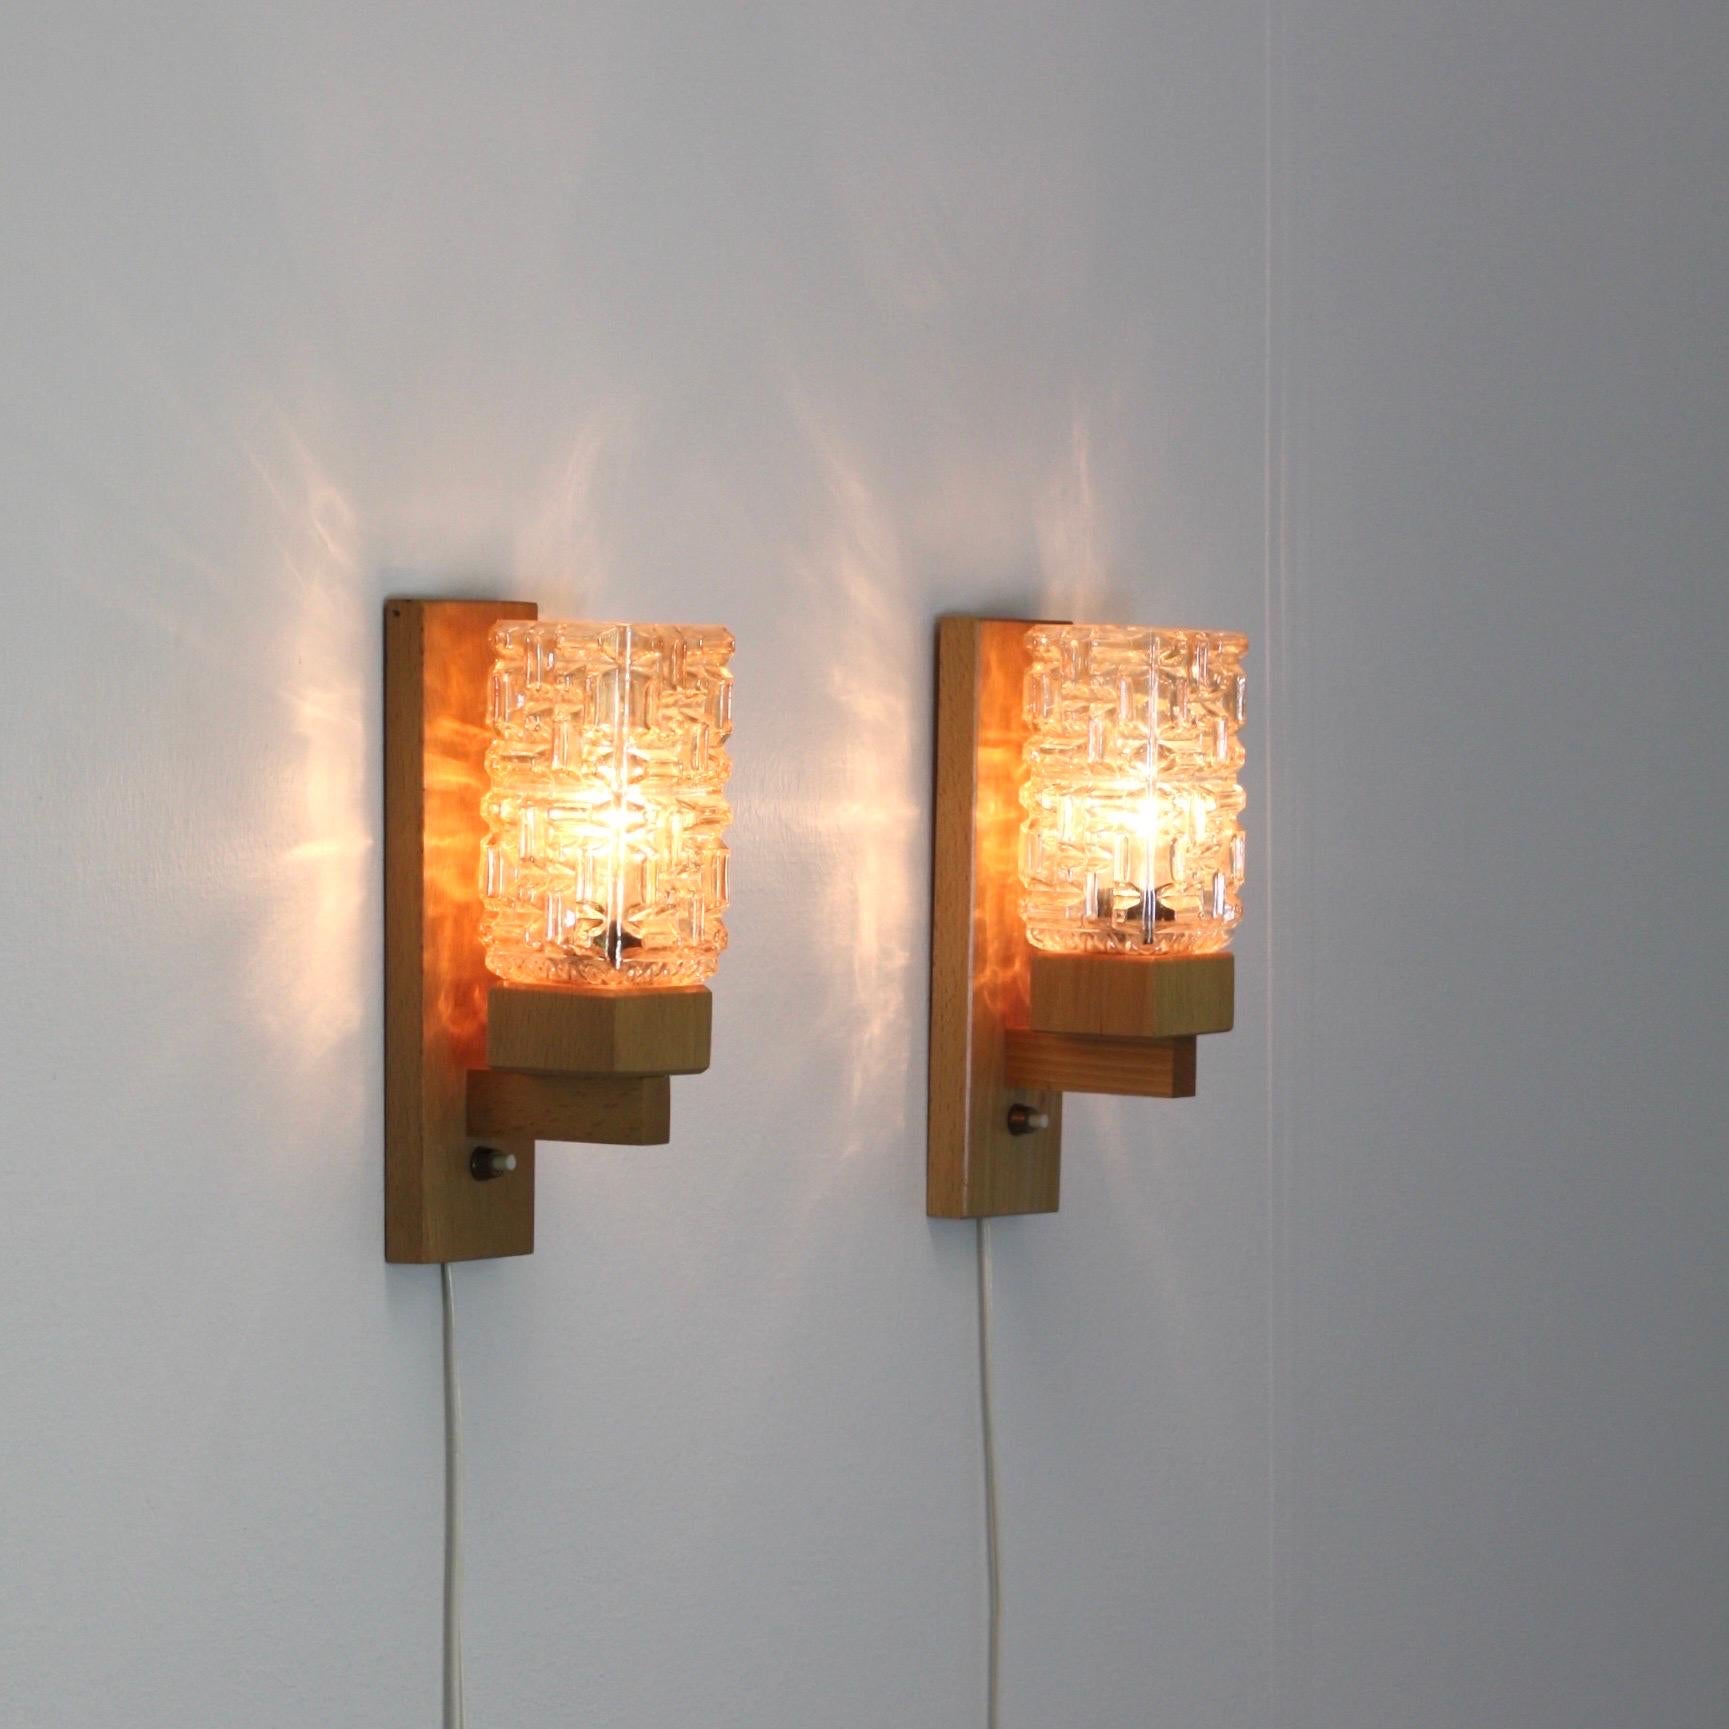 Set of 'Vitrika' Wall Lamps in Beech wood & Amber Glass, Denmark, 1970s For Sale 5